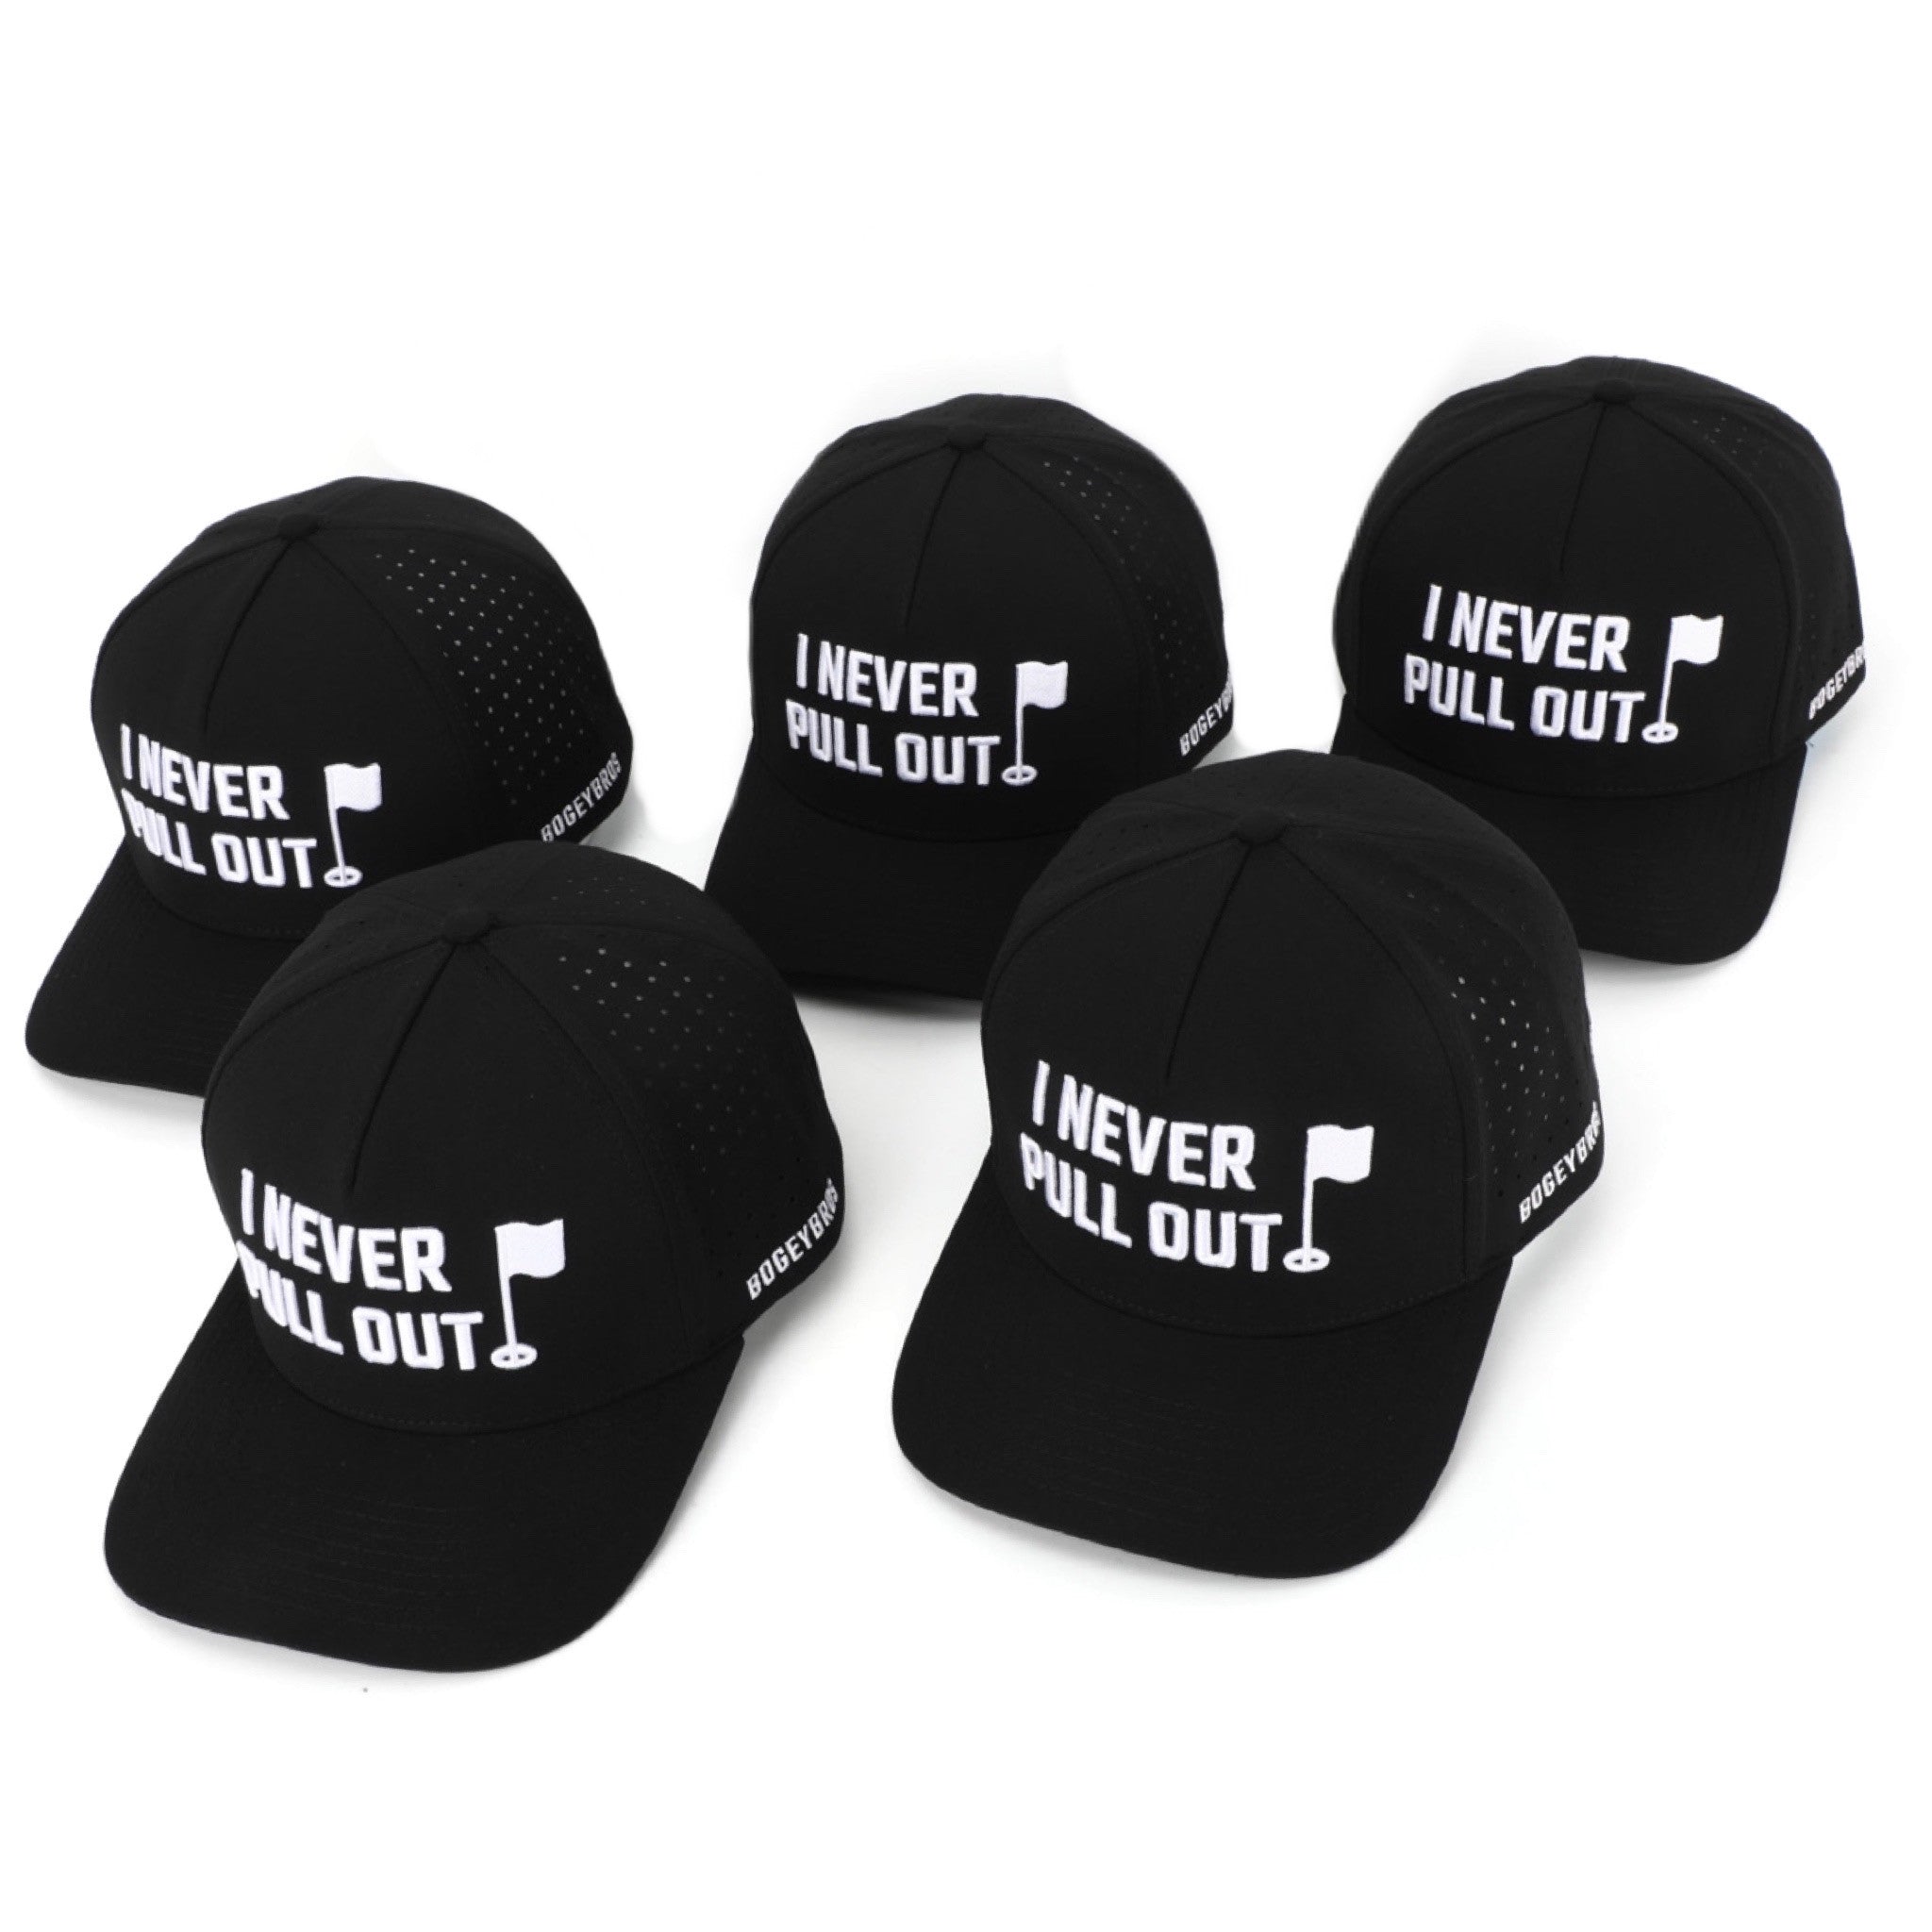 I Never Pull Out - Performance Golf Hat - Bogey Bros